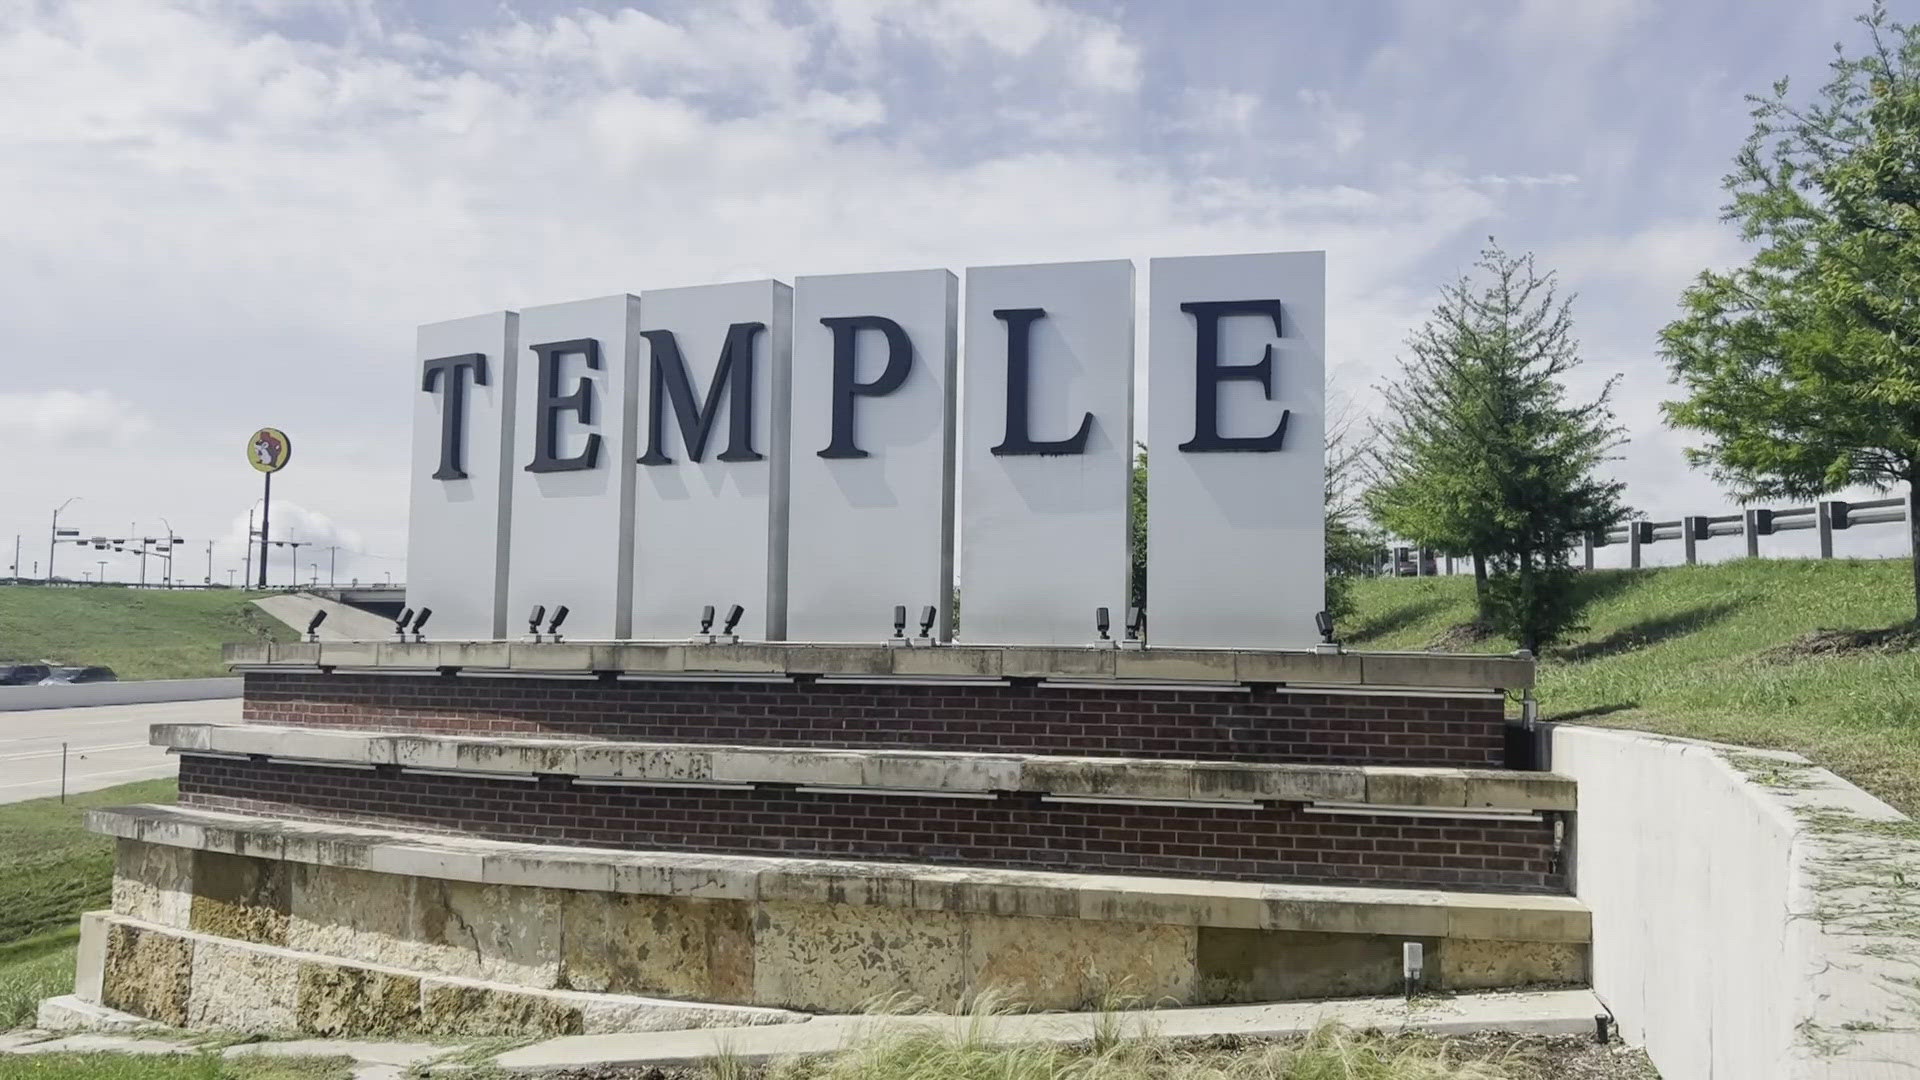 Temple has the highest population increase among Central Texas towns, data shows.